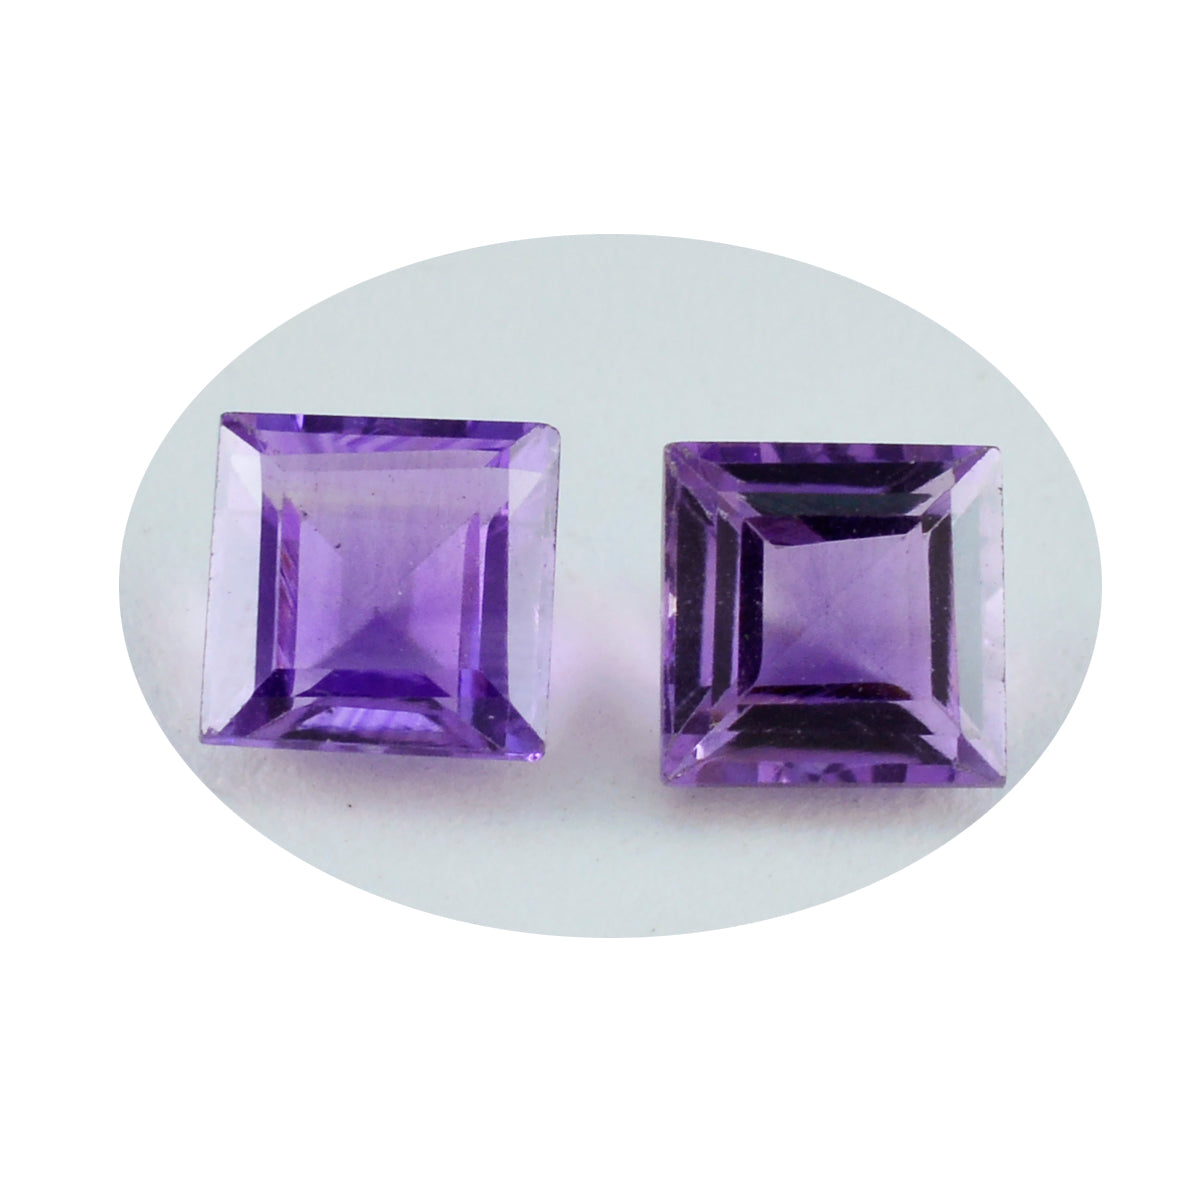 Riyogems 1PC Real Purple Amethyst Faceted 12x12 mm Square Shape good-looking Quality Loose Gems